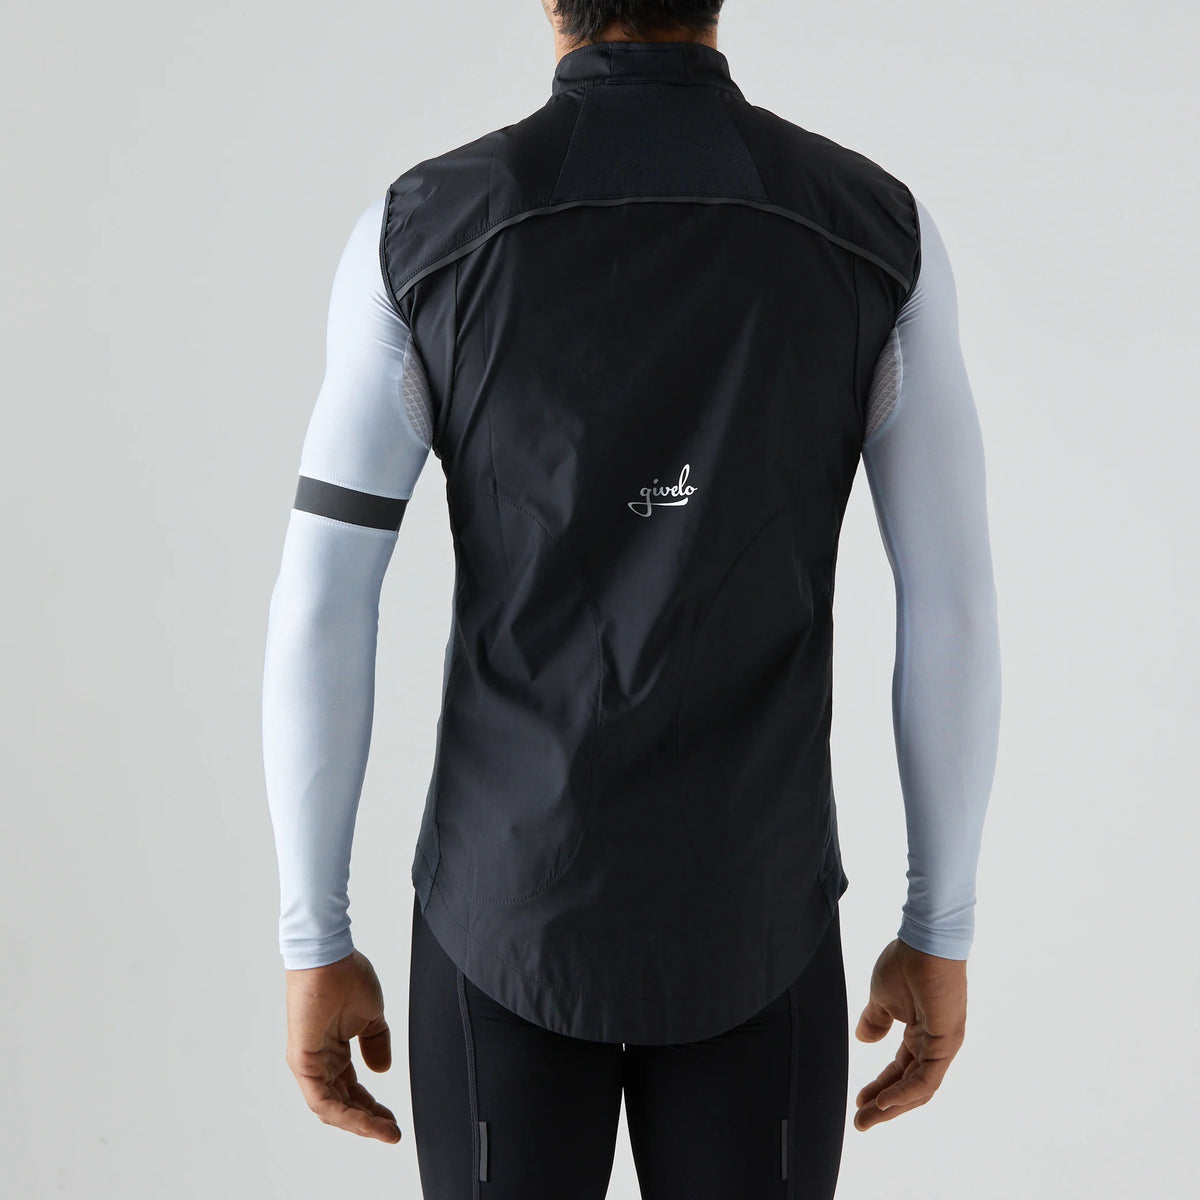 Givelo Quick-Free Gilet Black メンズ サイクルジレ | GEARED